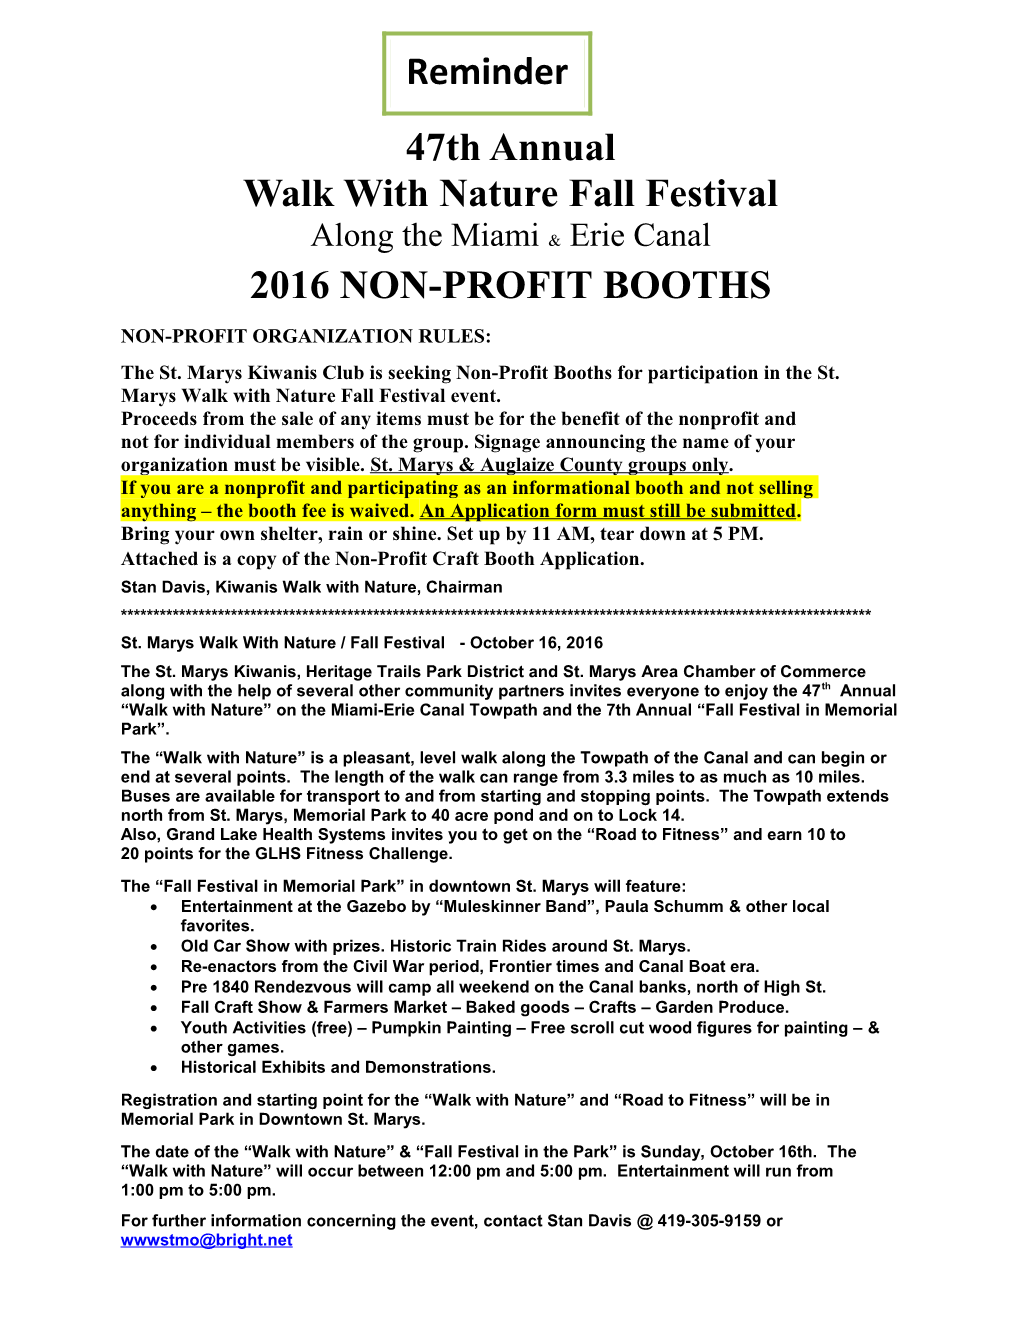 Walk with Nature Fall Festival